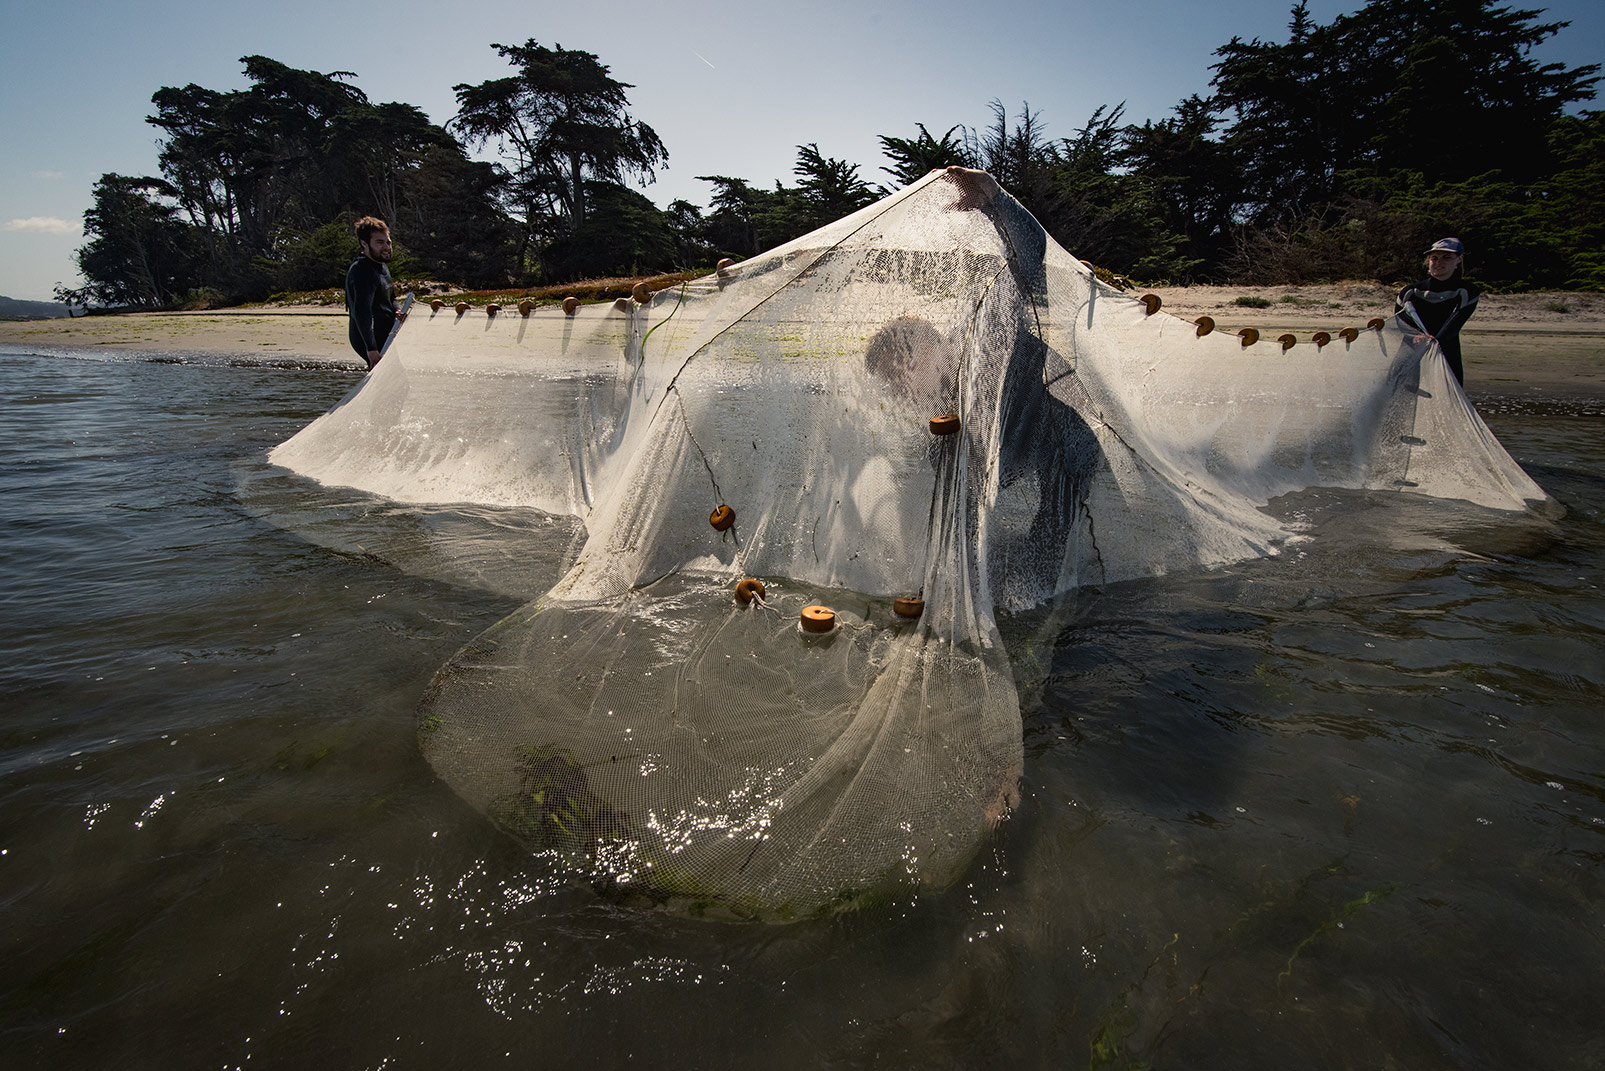 University of California, Santa Cruz researcher Brent Hughes (seen here beneath net) and two student research volunteers use a beach seine net to capture and survey populations of perch and flatfish at lower Elkhorn Slough. Photo © Kiliii Yuyan